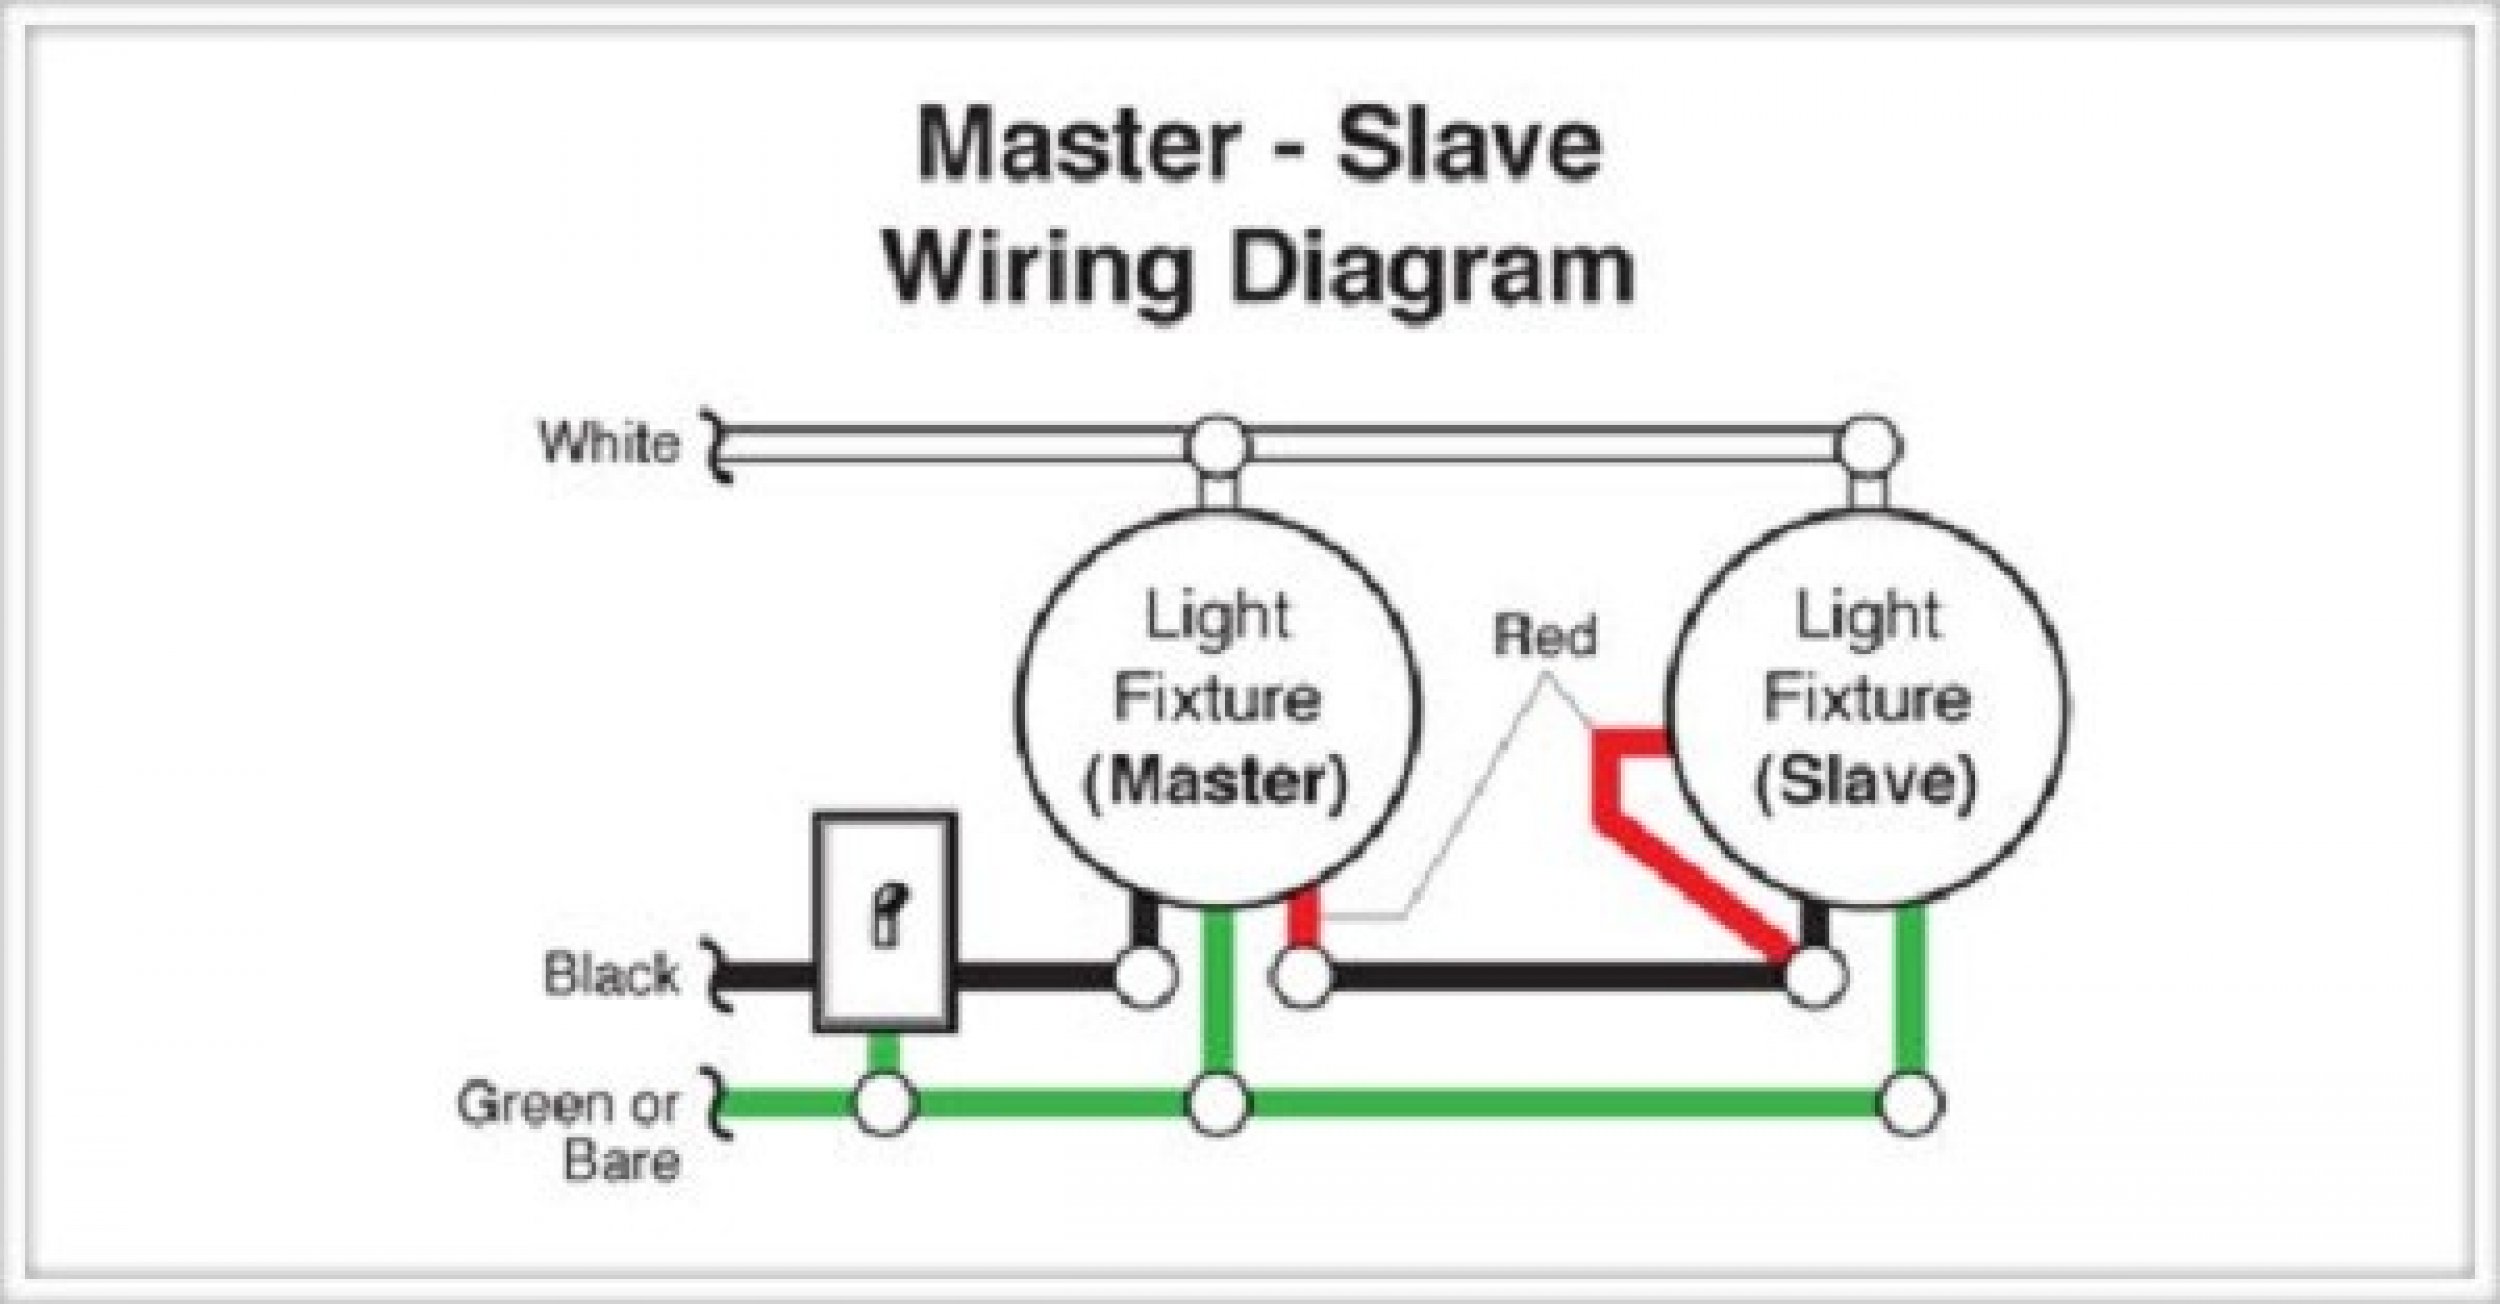 Master and Slave Wiring